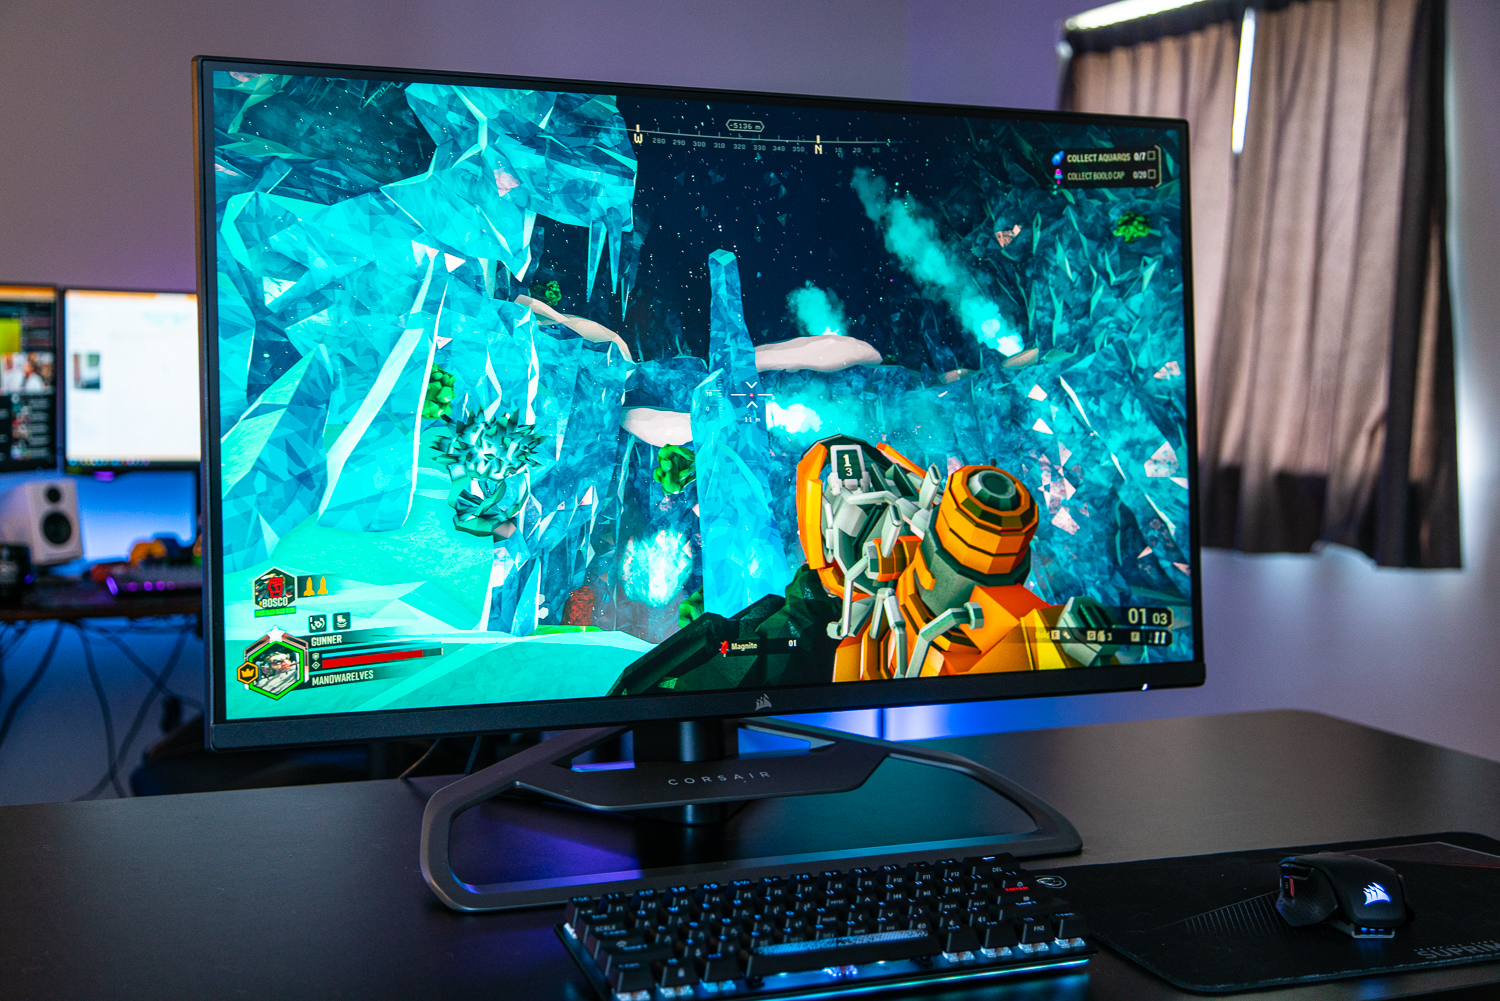 Xeneon 32 review: great gaming monitor, at a price | Digital Trends